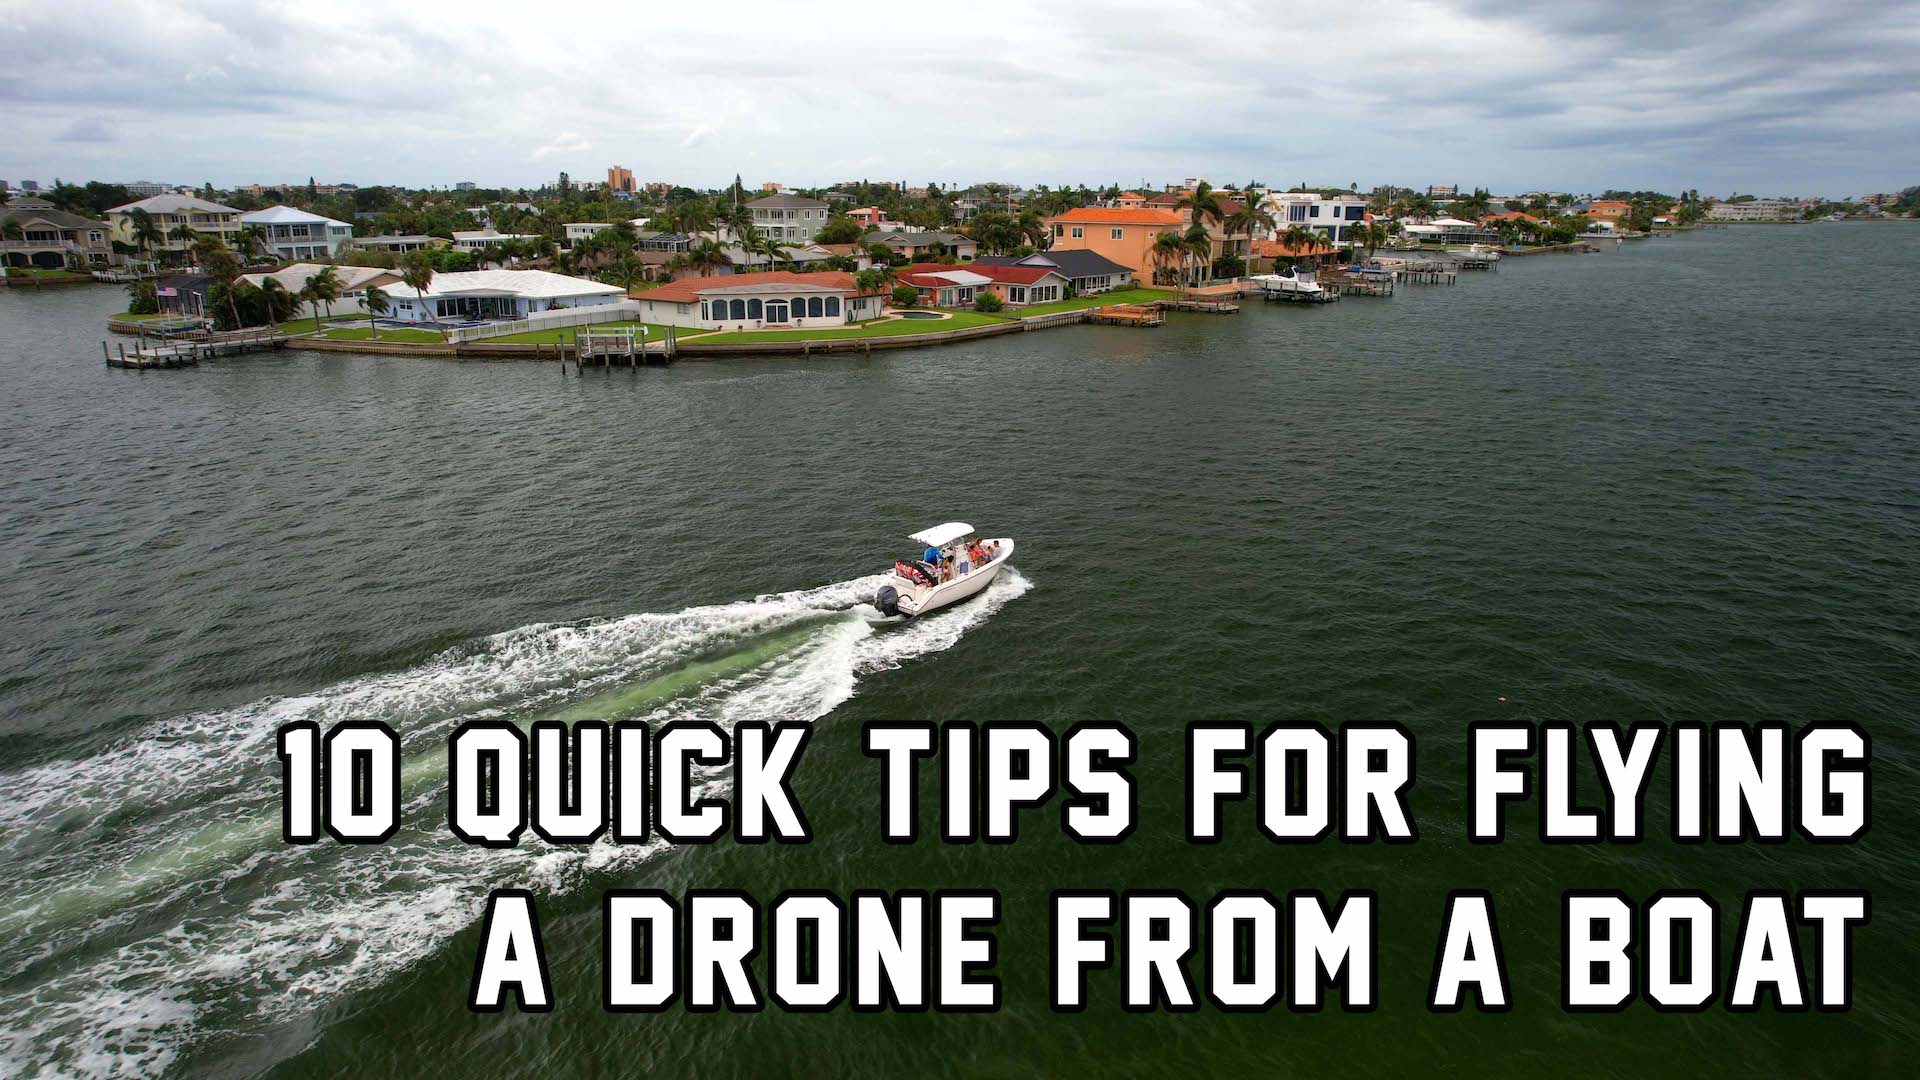 A boat in the water with the headline: "10 Quick Tips for Flying a Drone from a Boat"